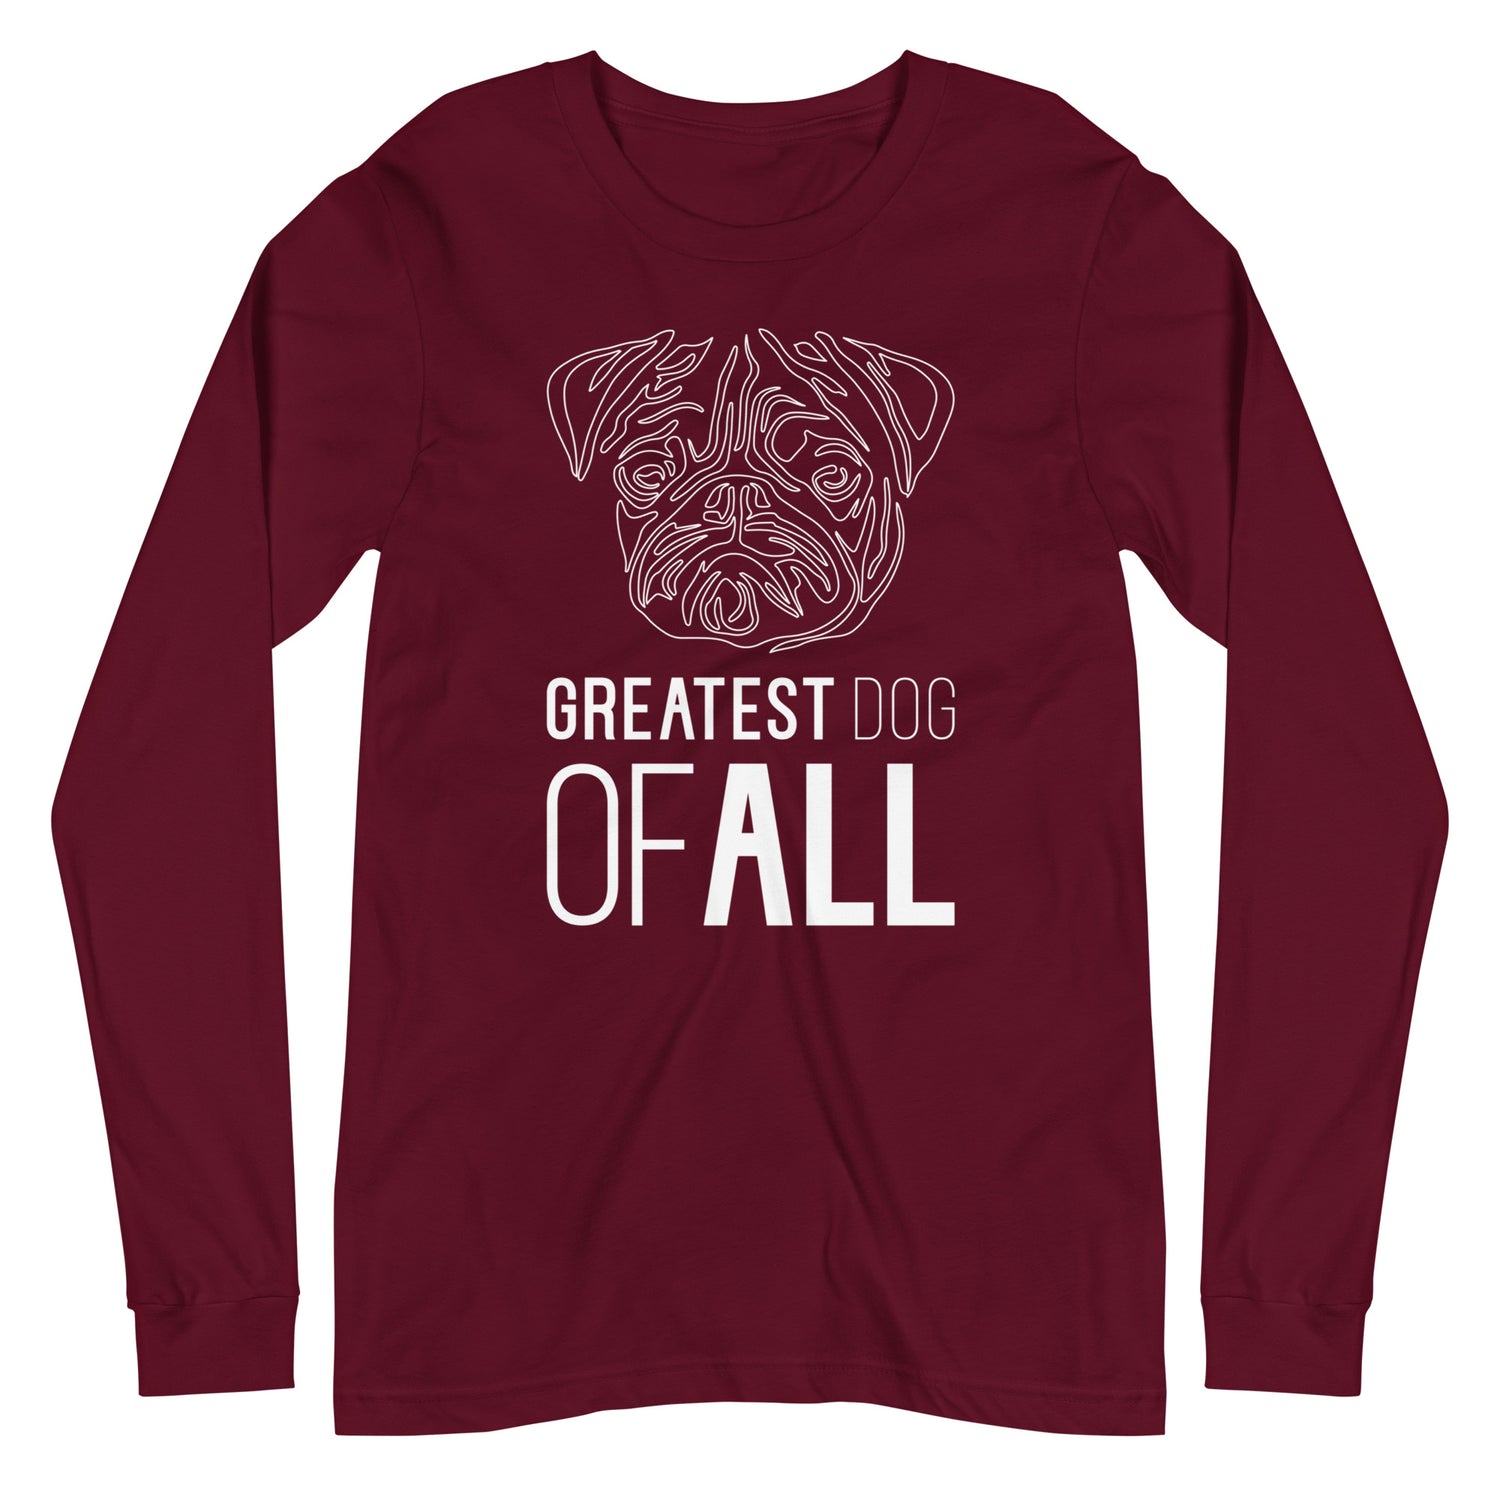 White line Pug face with Greatest Dog of All caption on unisex maroon long sleeve t-shirt